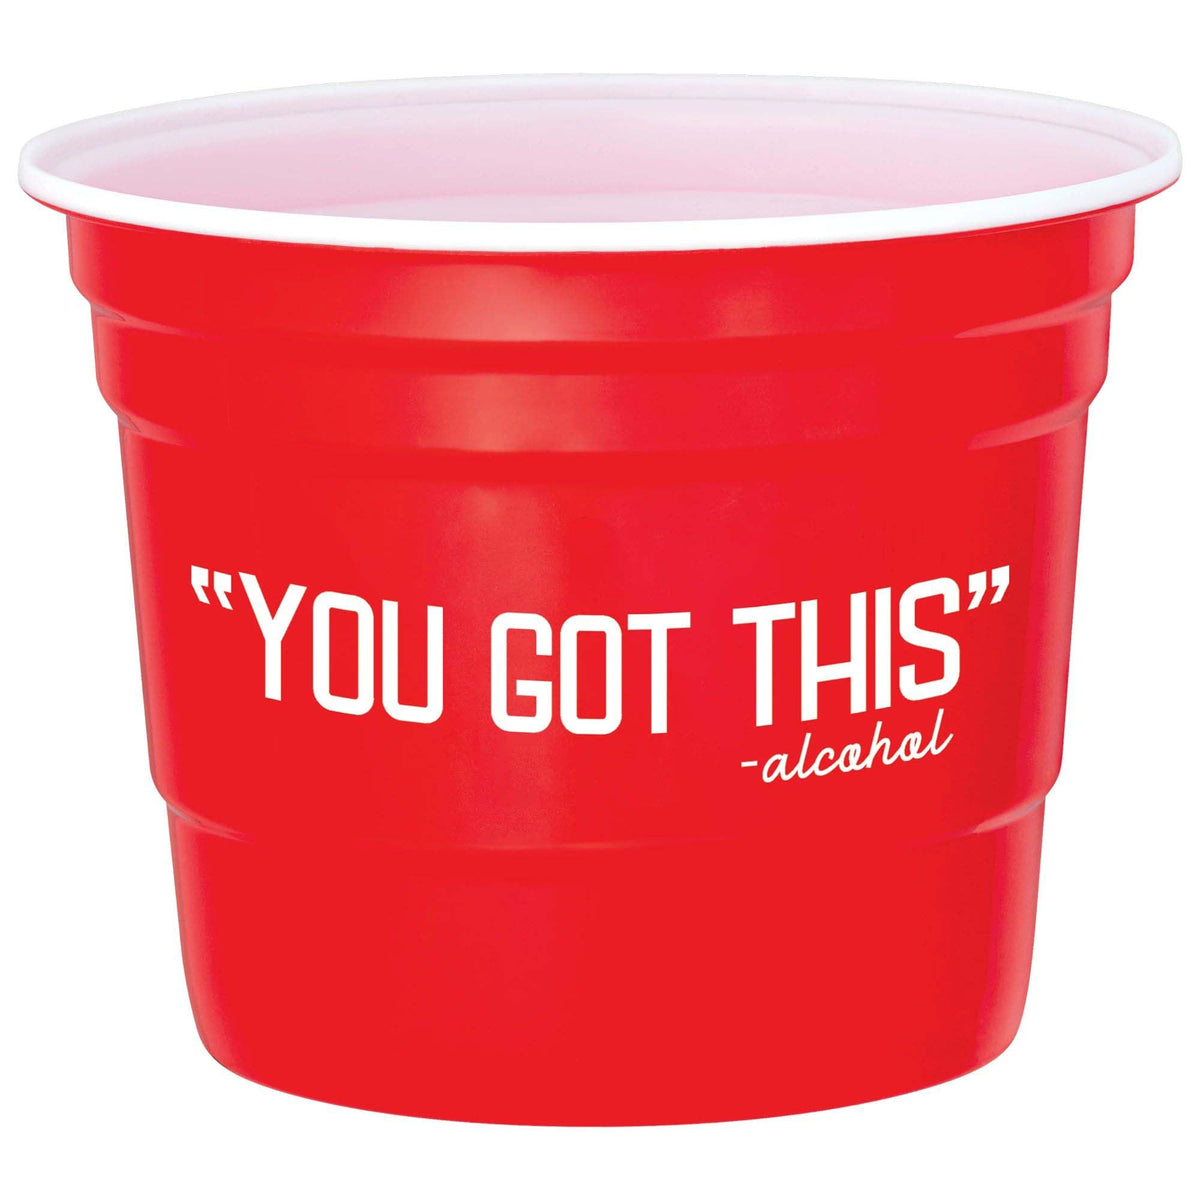 AMSCAN CA Graduation Graduation "You got this" Red Ice Bucket, 6 L, 1 Count